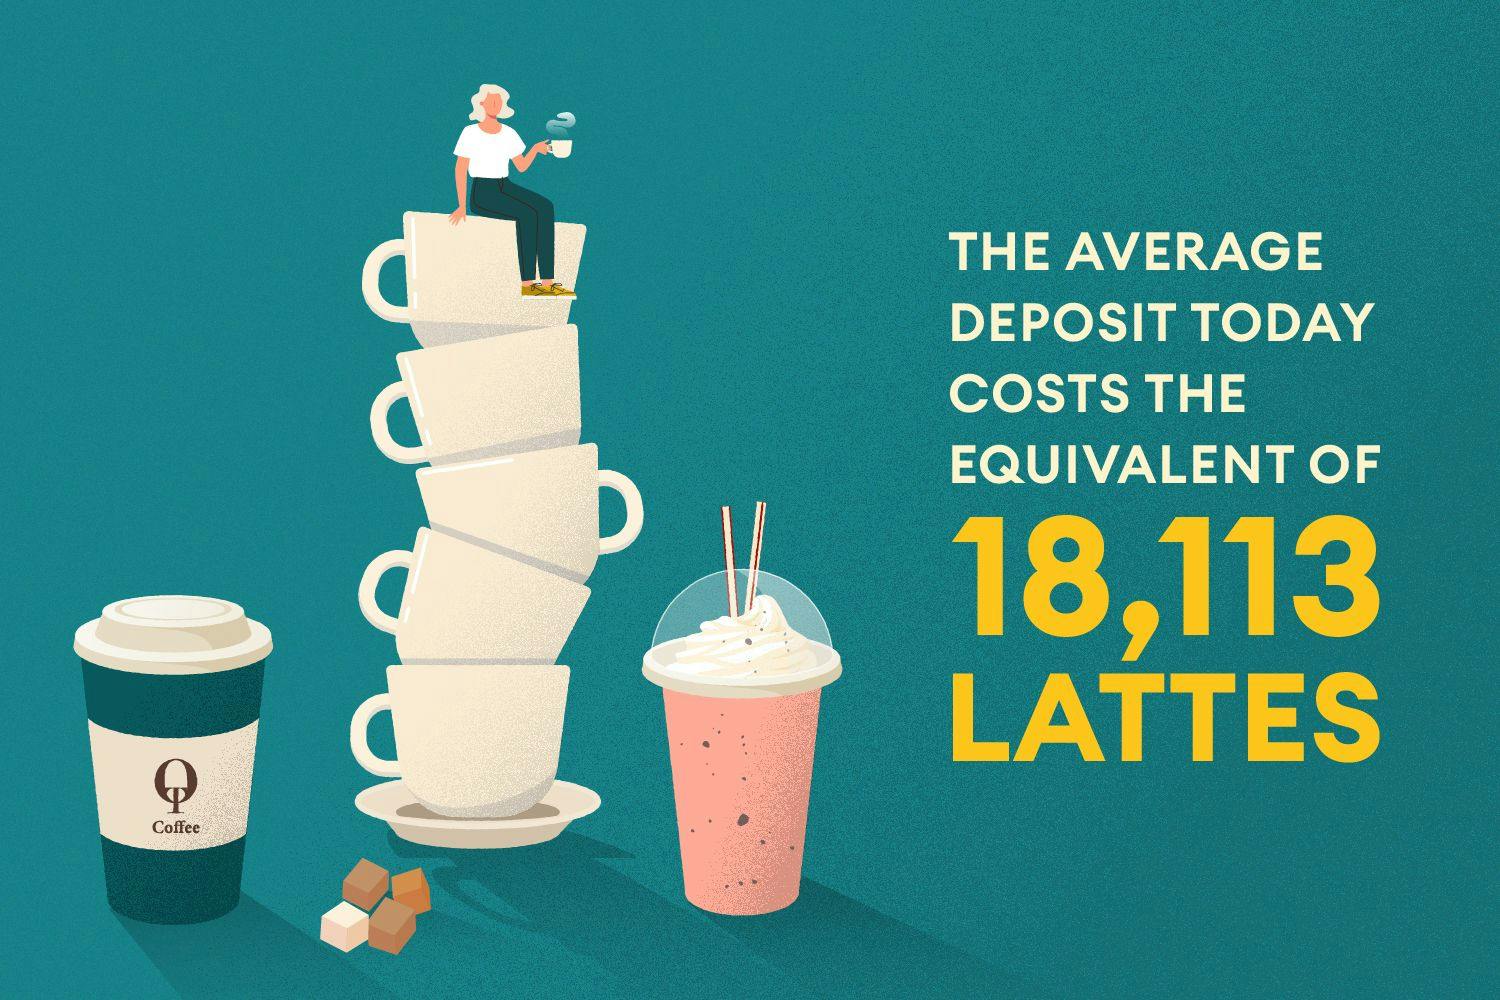 Illustration showing person sat on coffee cup. Text reads: The average deposit today costs the equivalent of 18,113 lattes